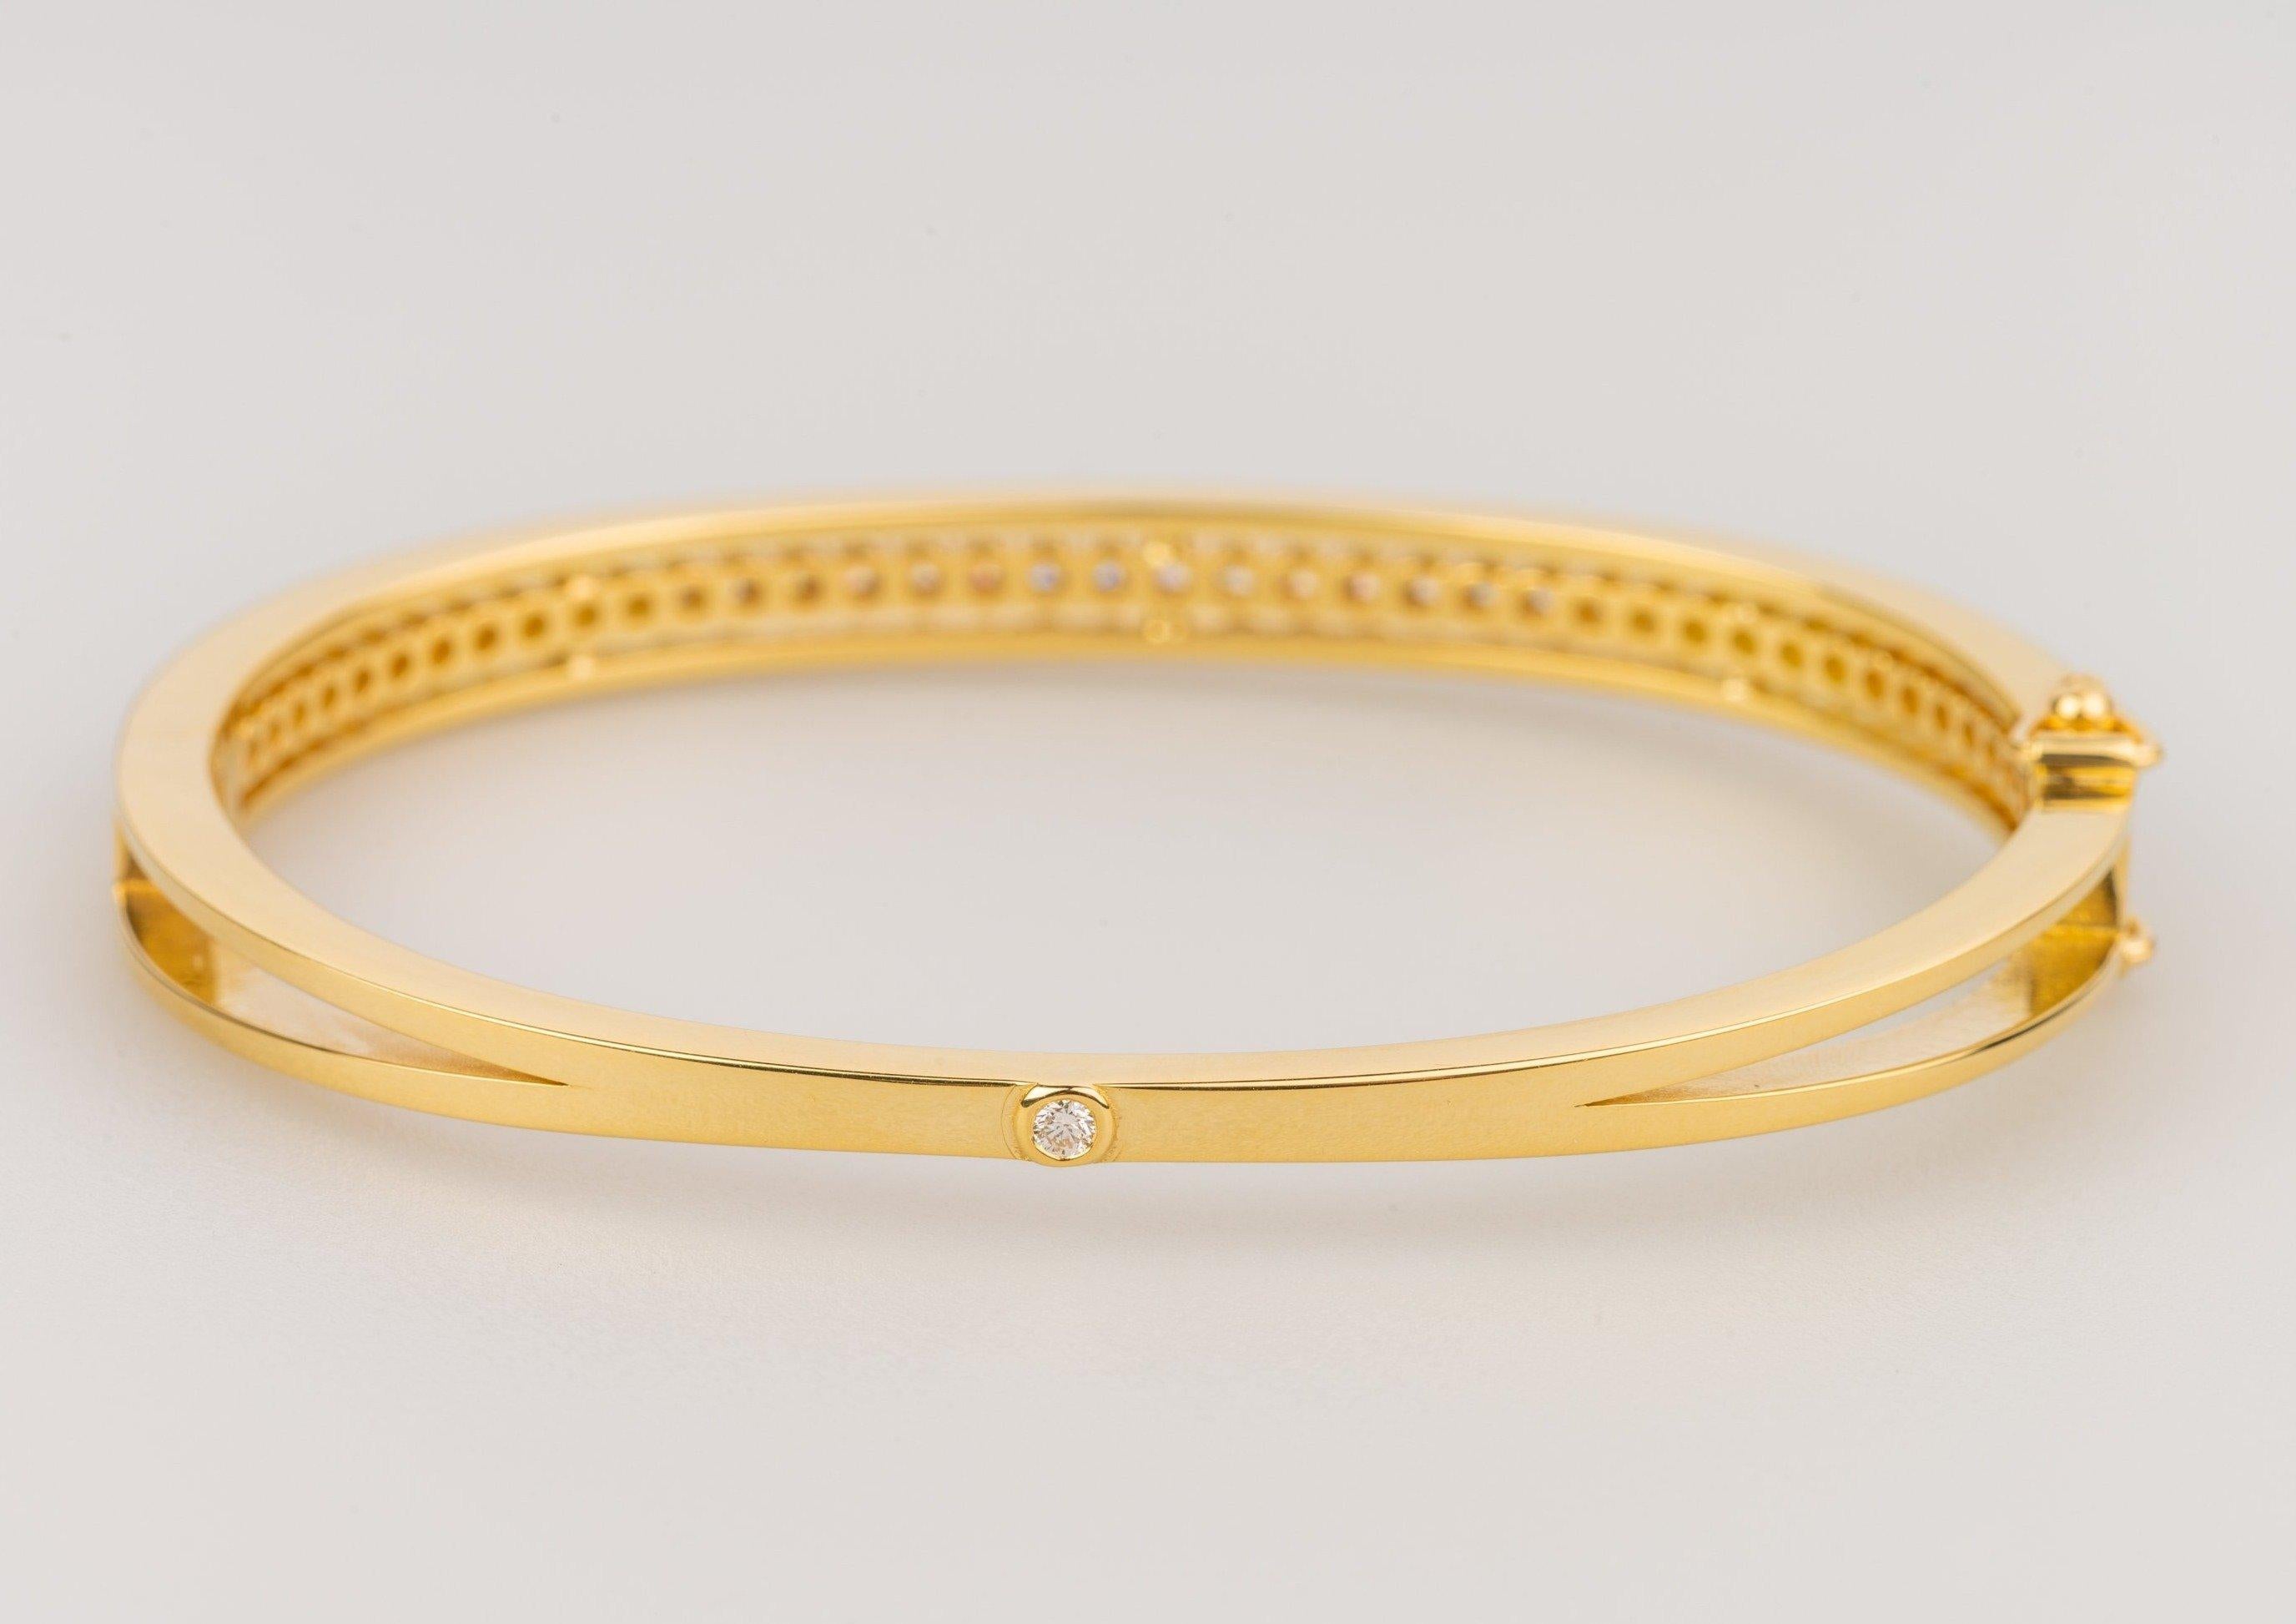 An 18k yellow gold bracelet featuring 40 round full cut white diamonds F color VS clarity 1.20 total carat weight, part of the 